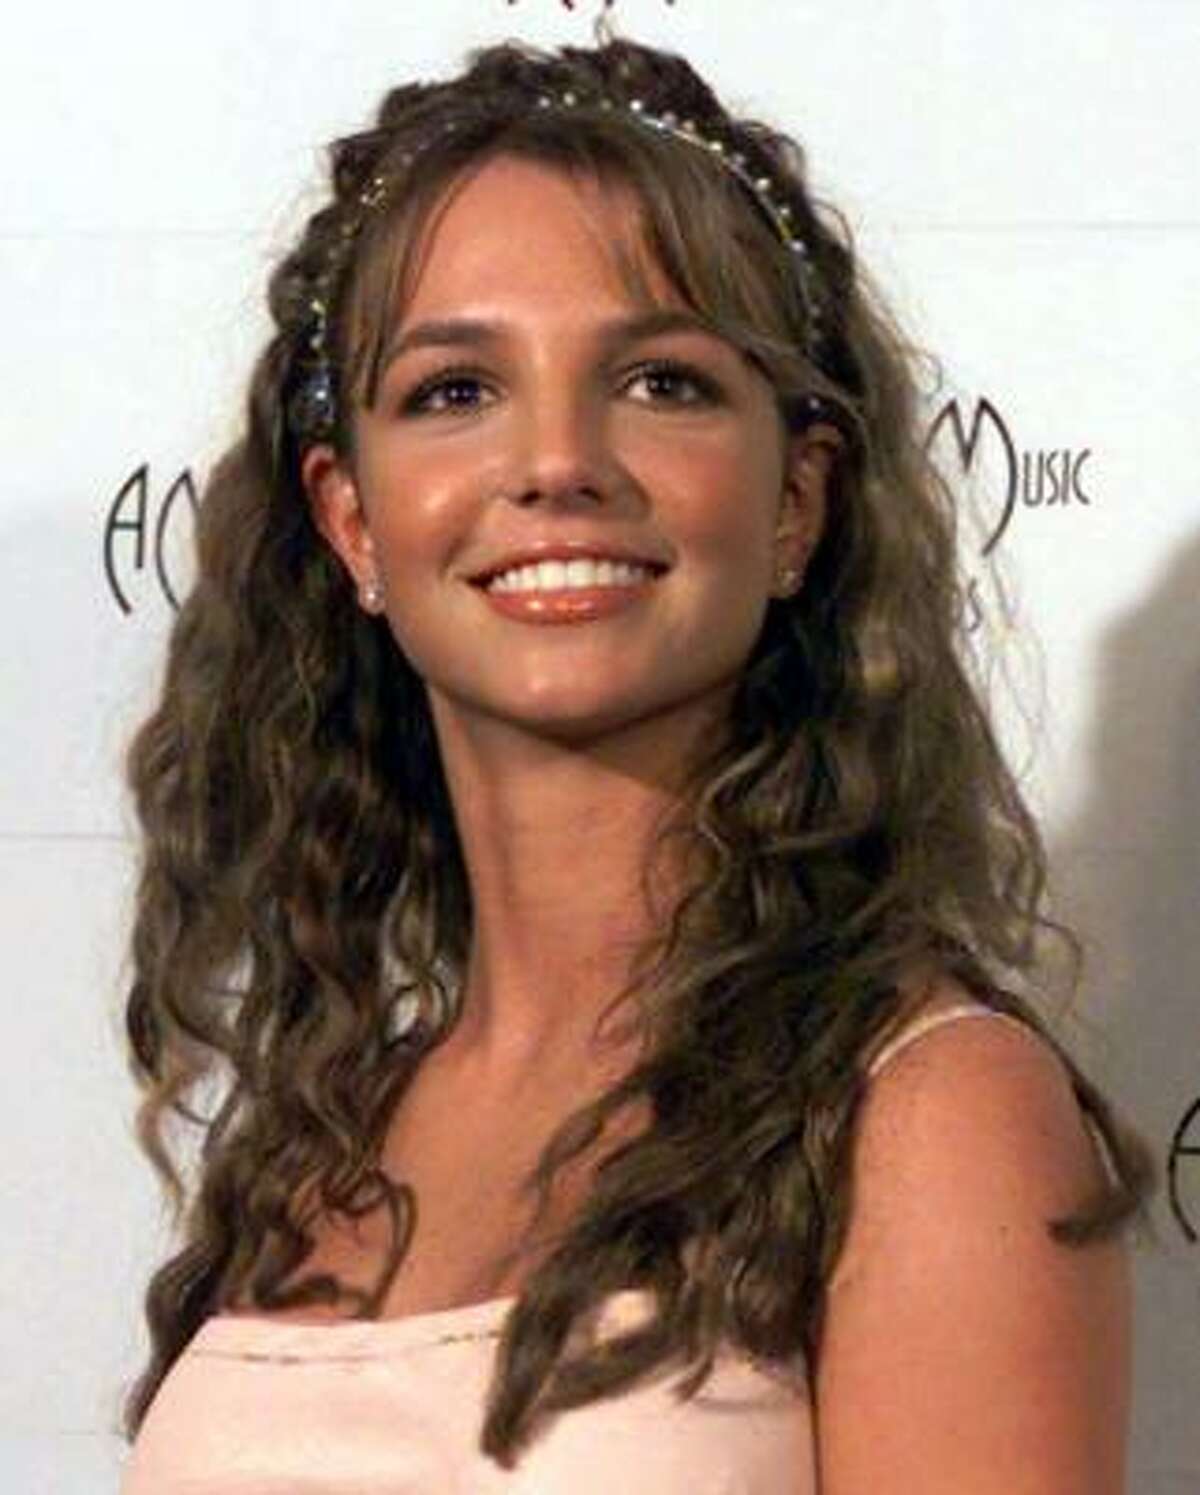 January 1999: Britney Spears at the 26th annual American Music Awards. When the American Family Association slammed her sexy girl image, Britney famously proclaimed she would remain a virgin until marriage.